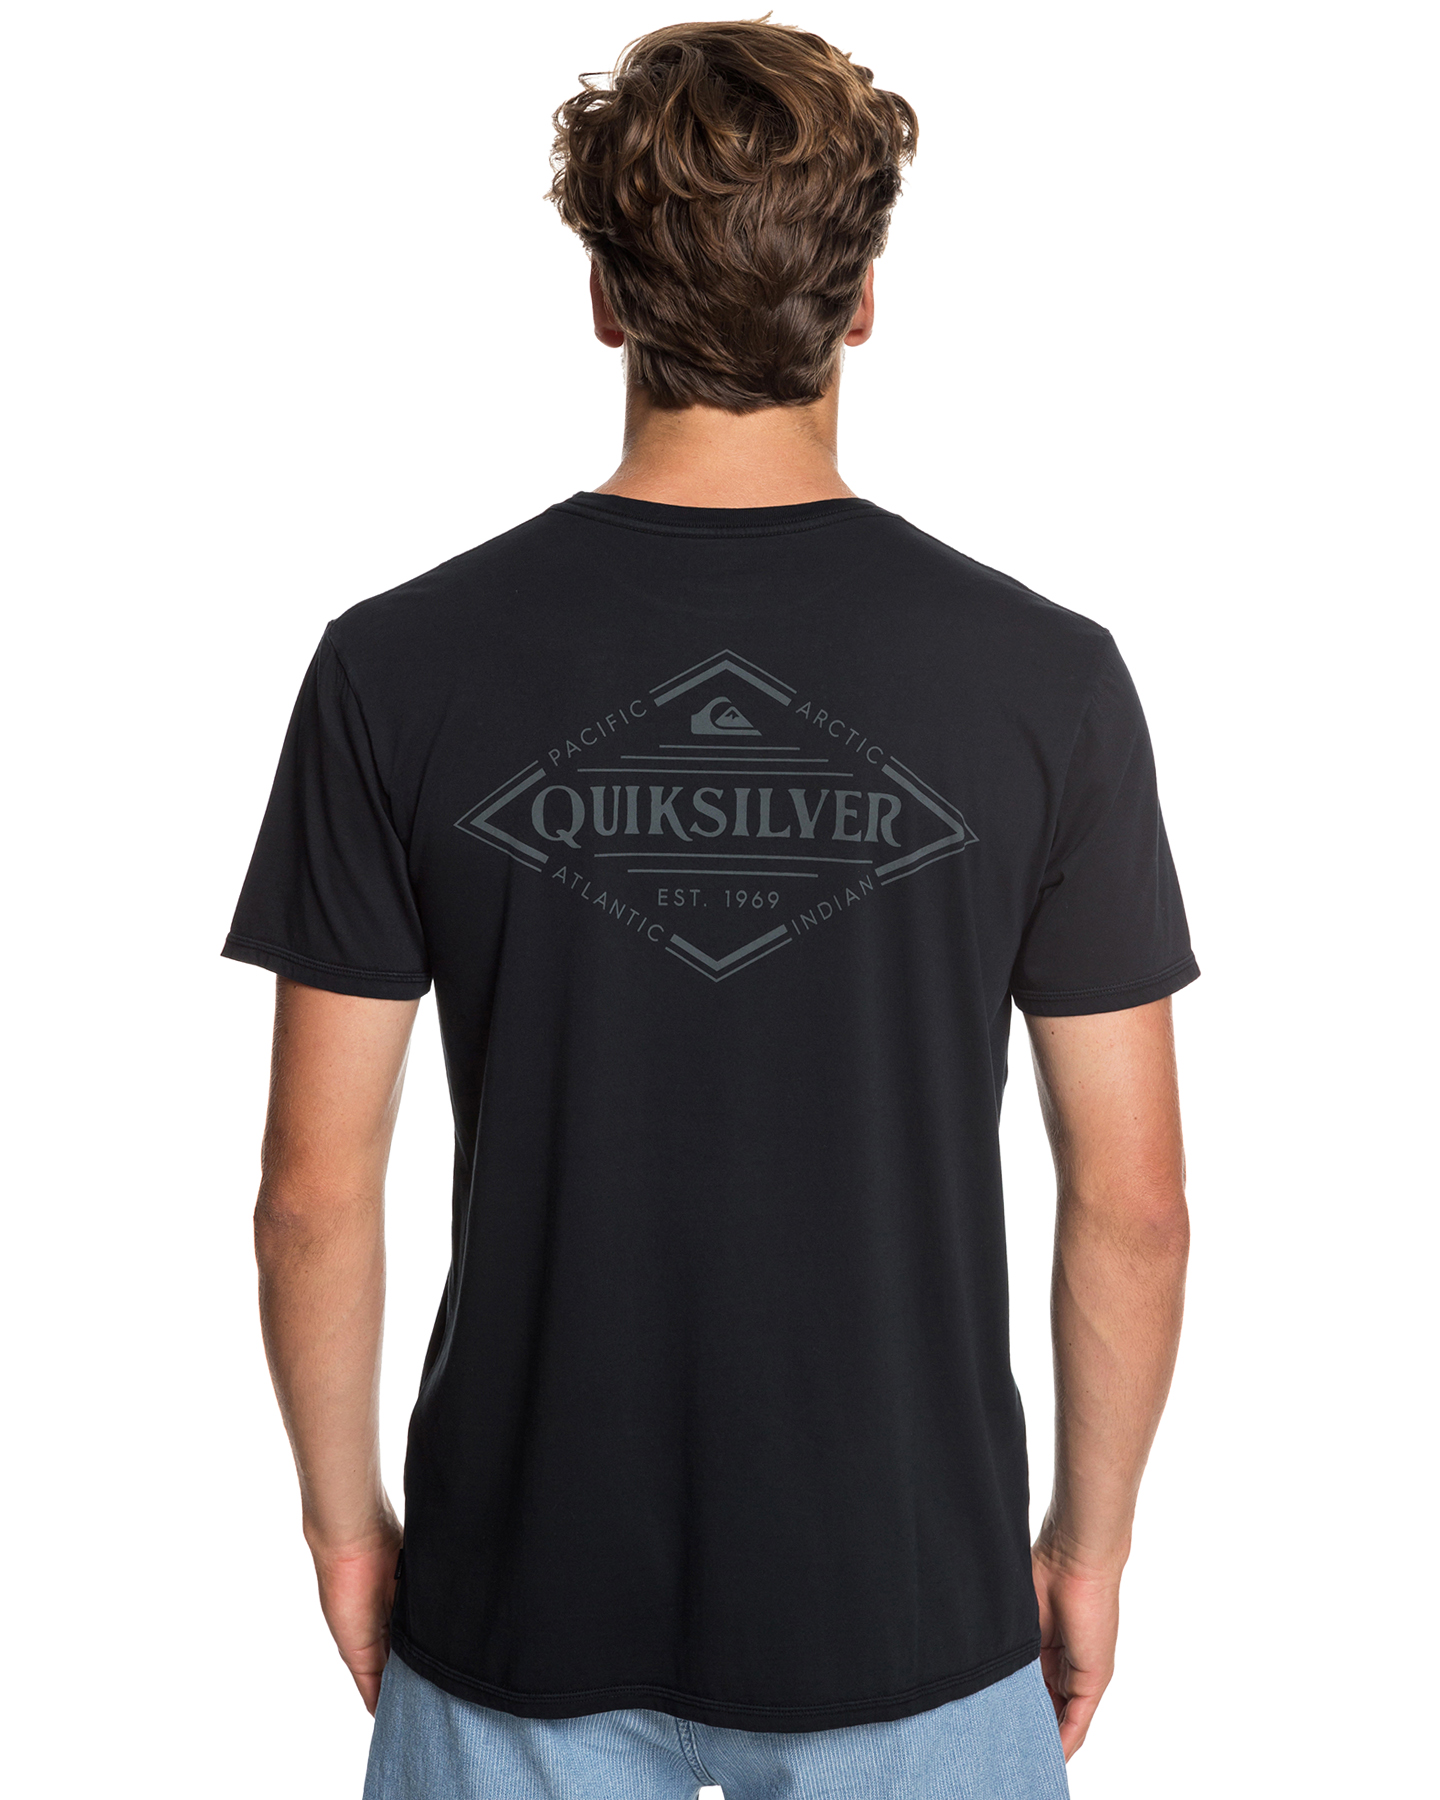 Quiksilver Mens Vibed Ss Tee - Black | SurfStitch